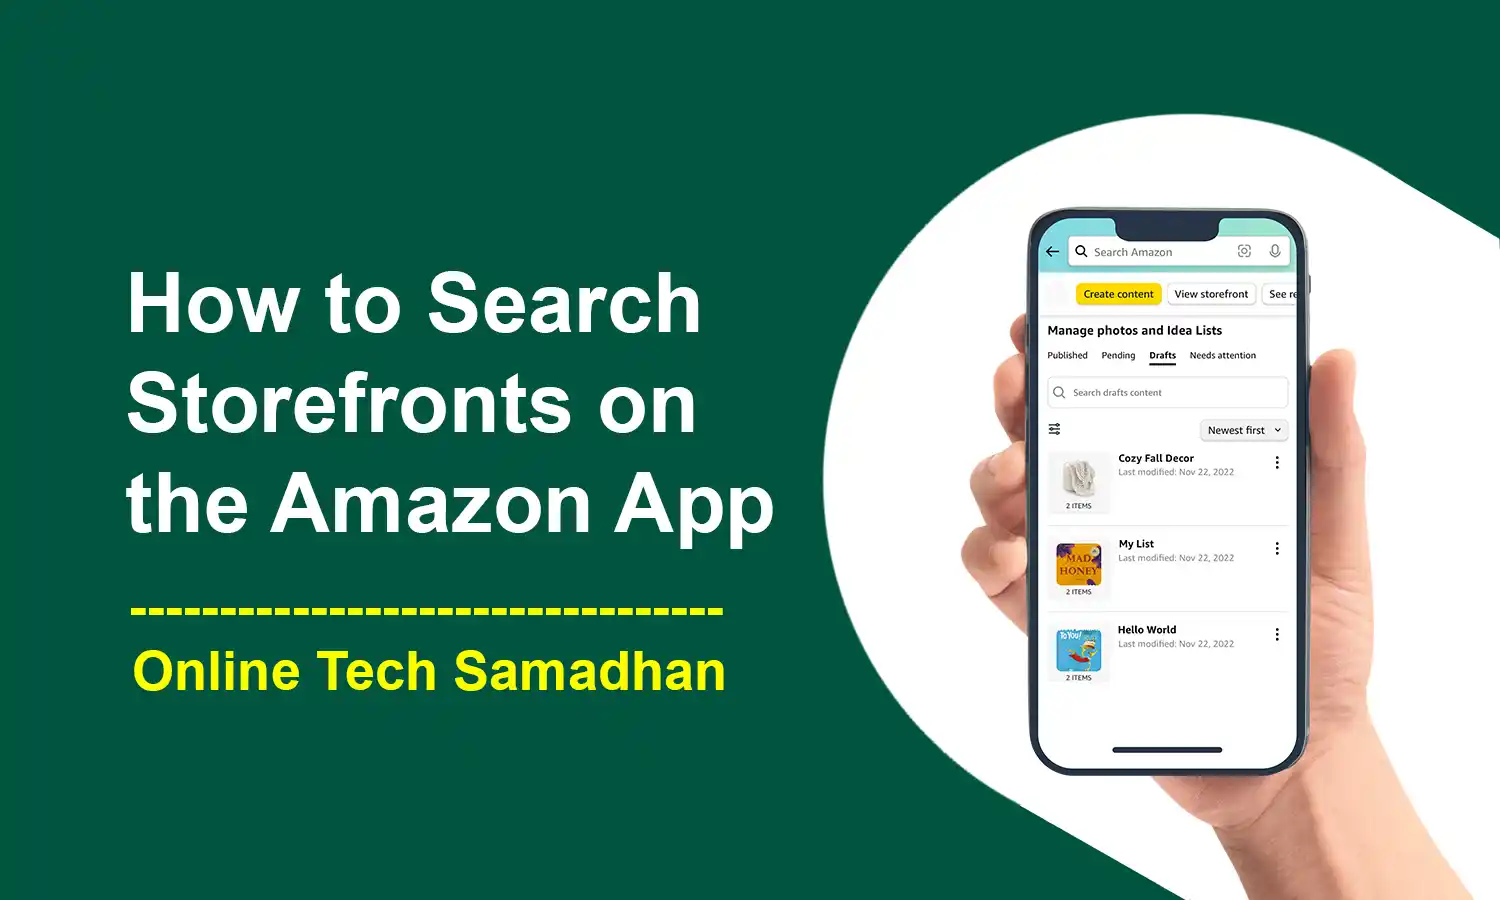 How to Search Storefronts on the Amazon App